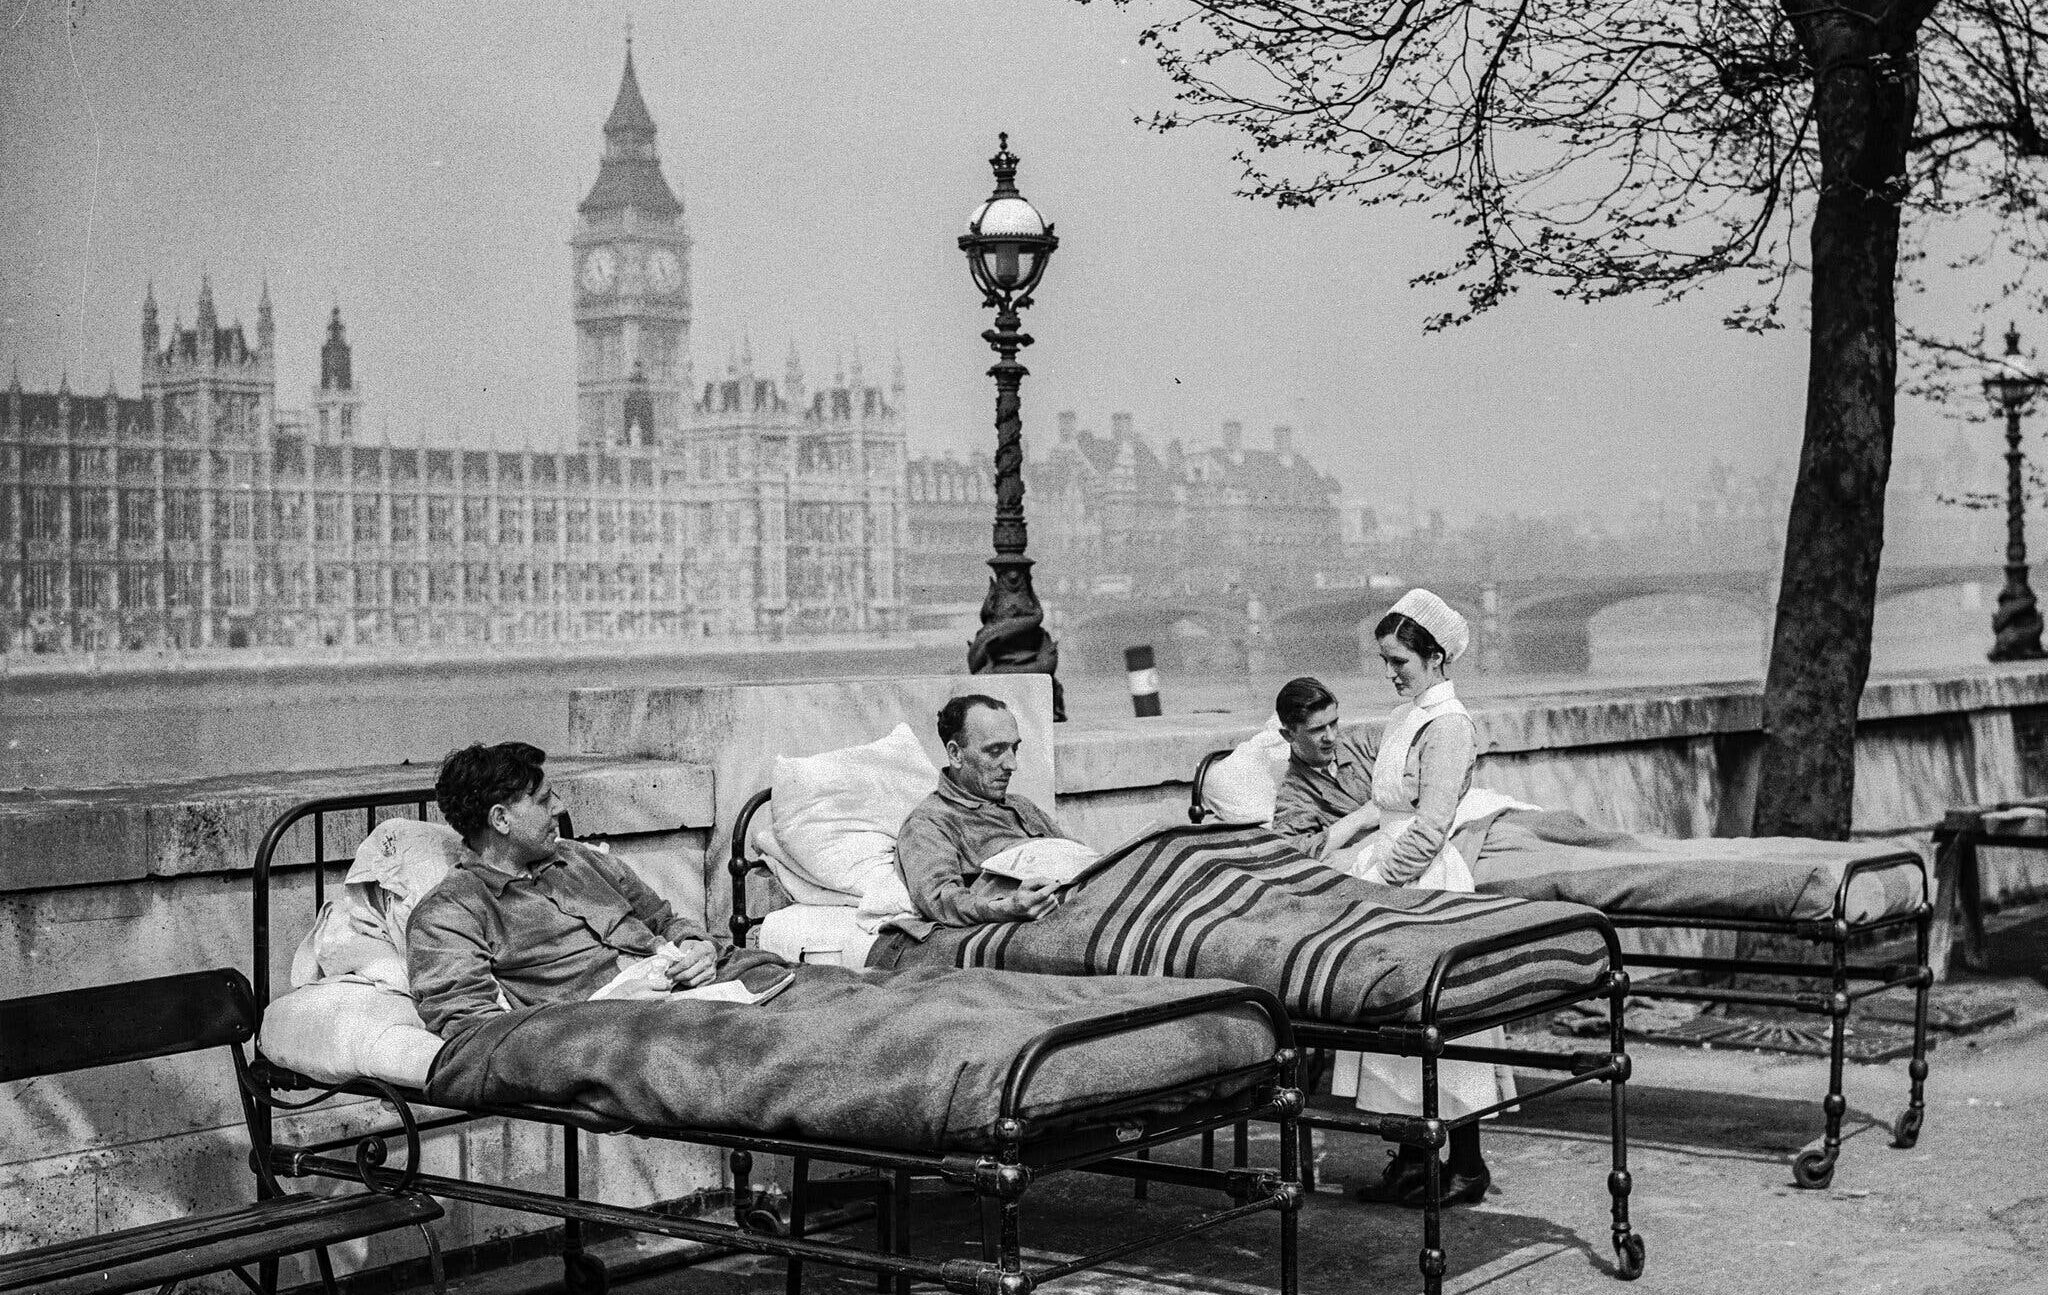 Tuberculosis patients recovering in open air along the River Thames in London in 1936.